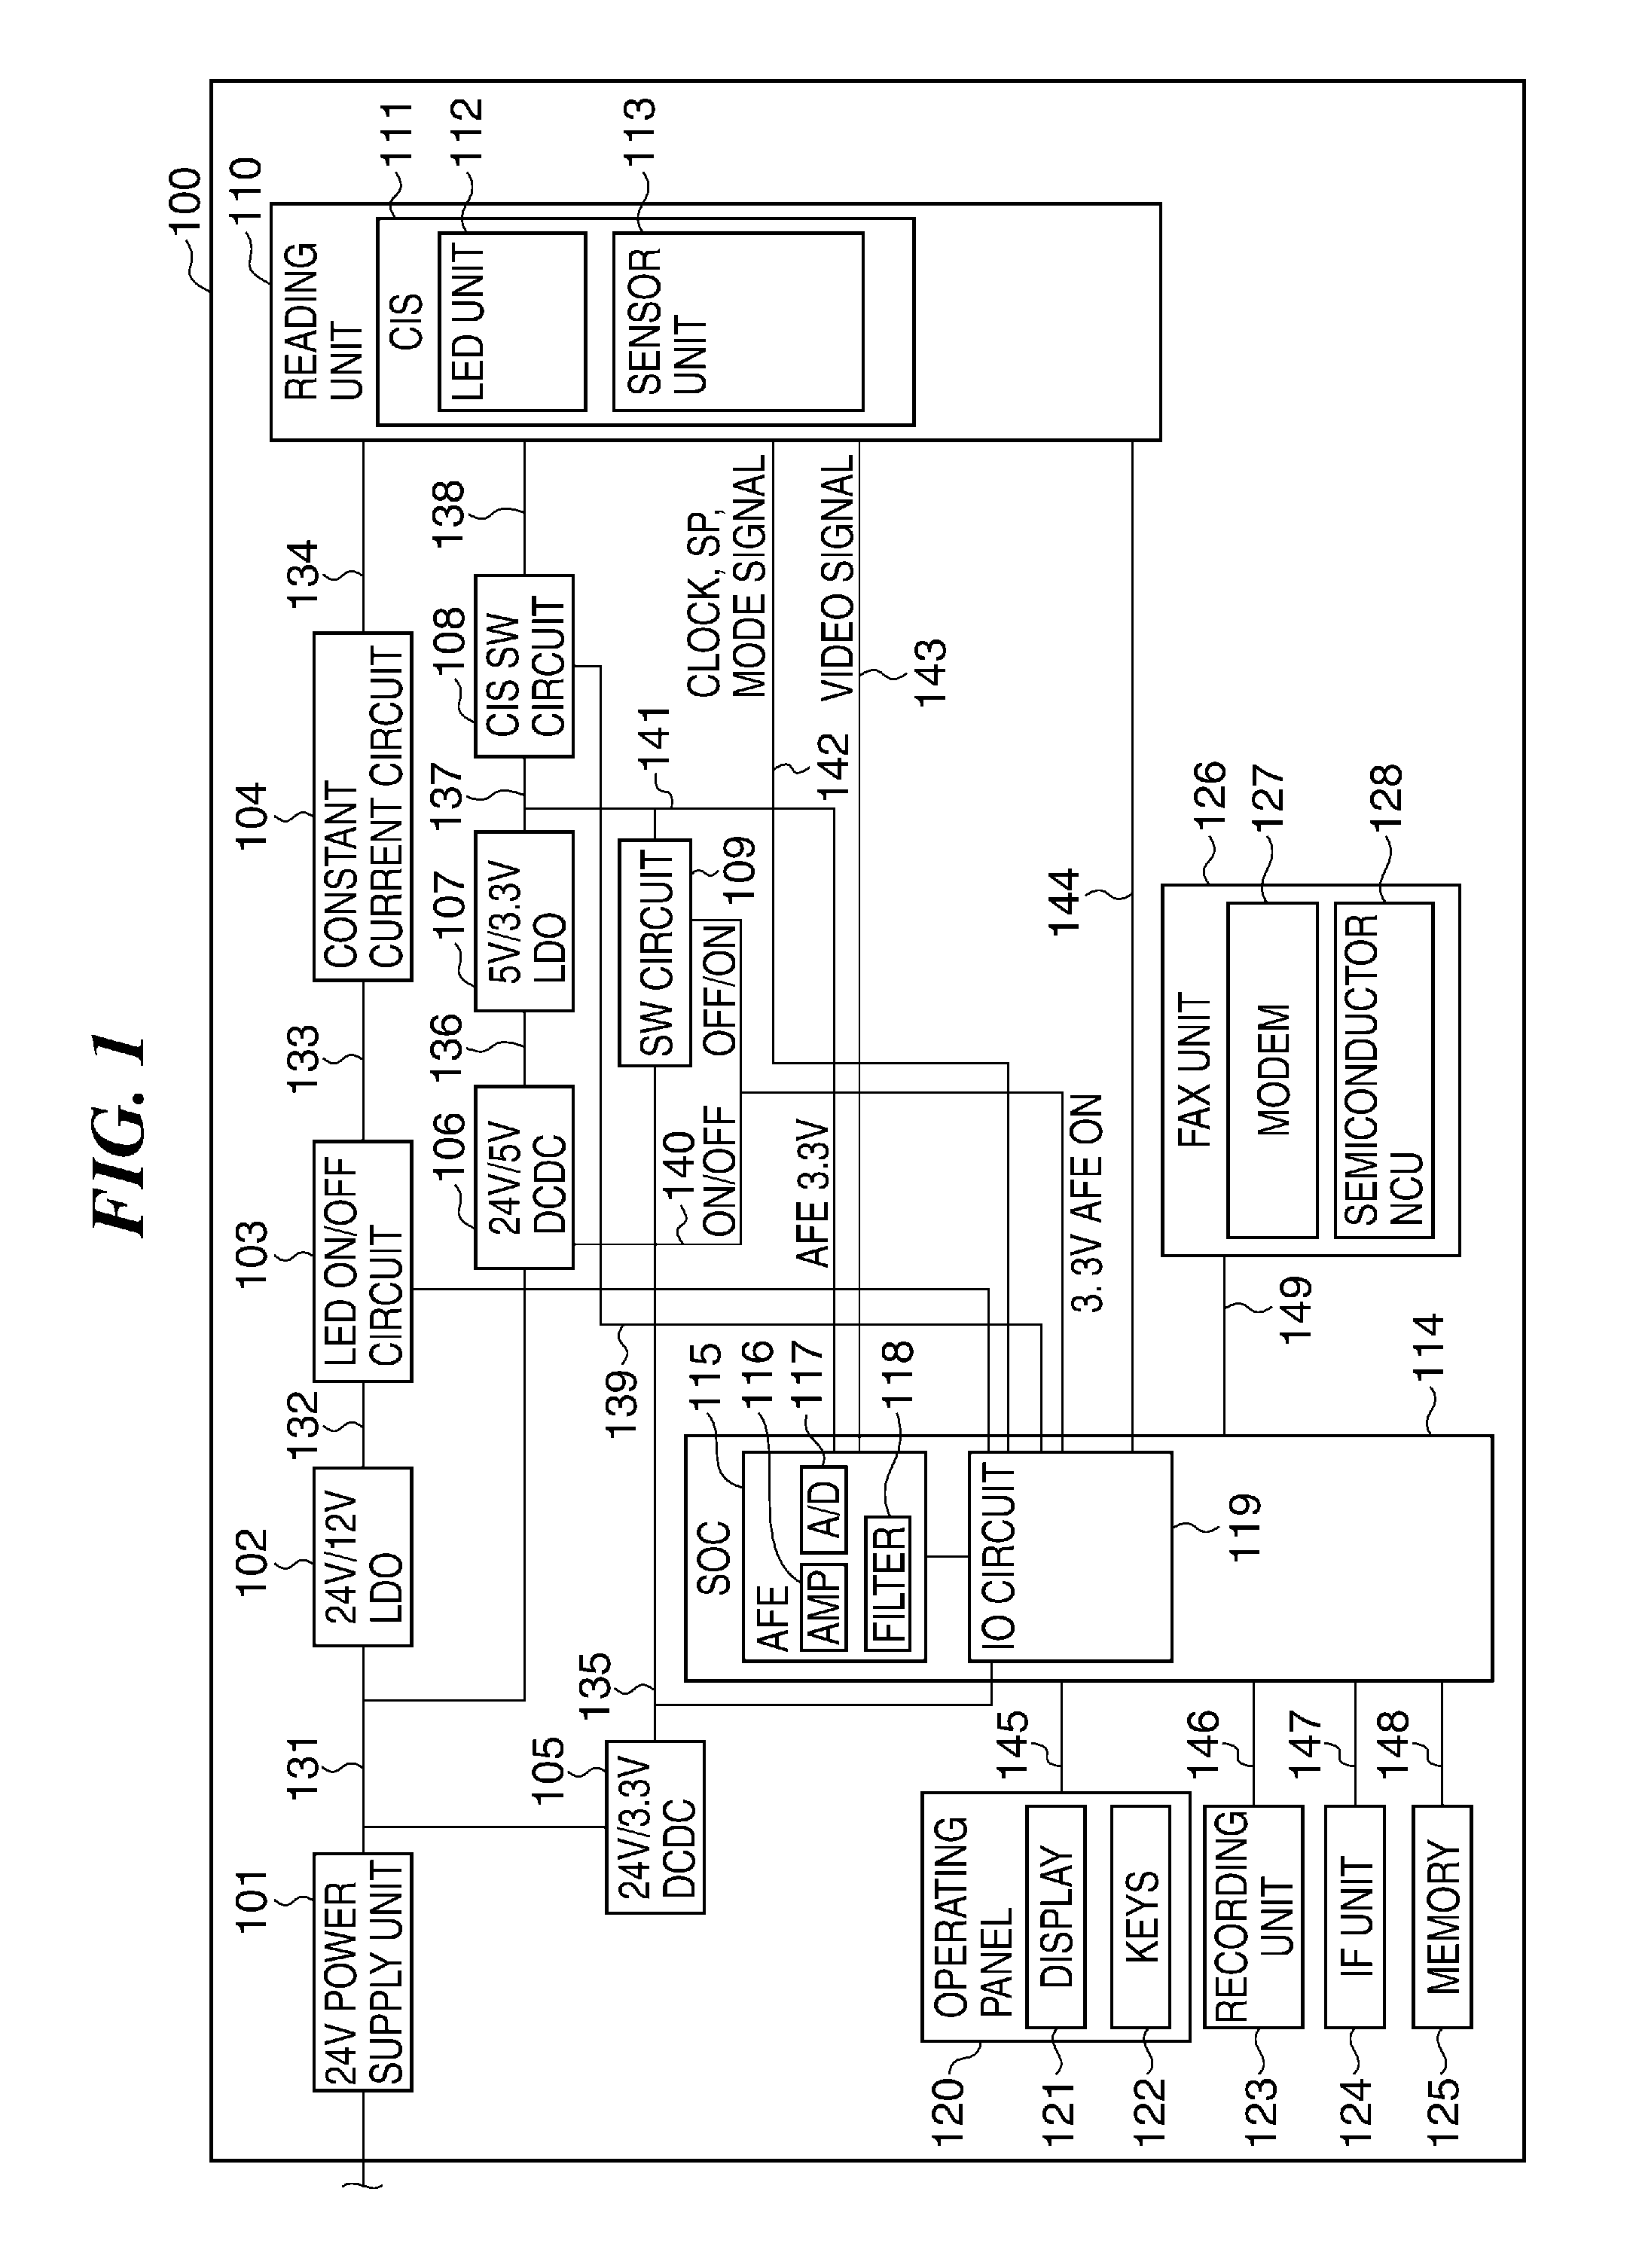 Image forming apparatus using technique for controlling power supply